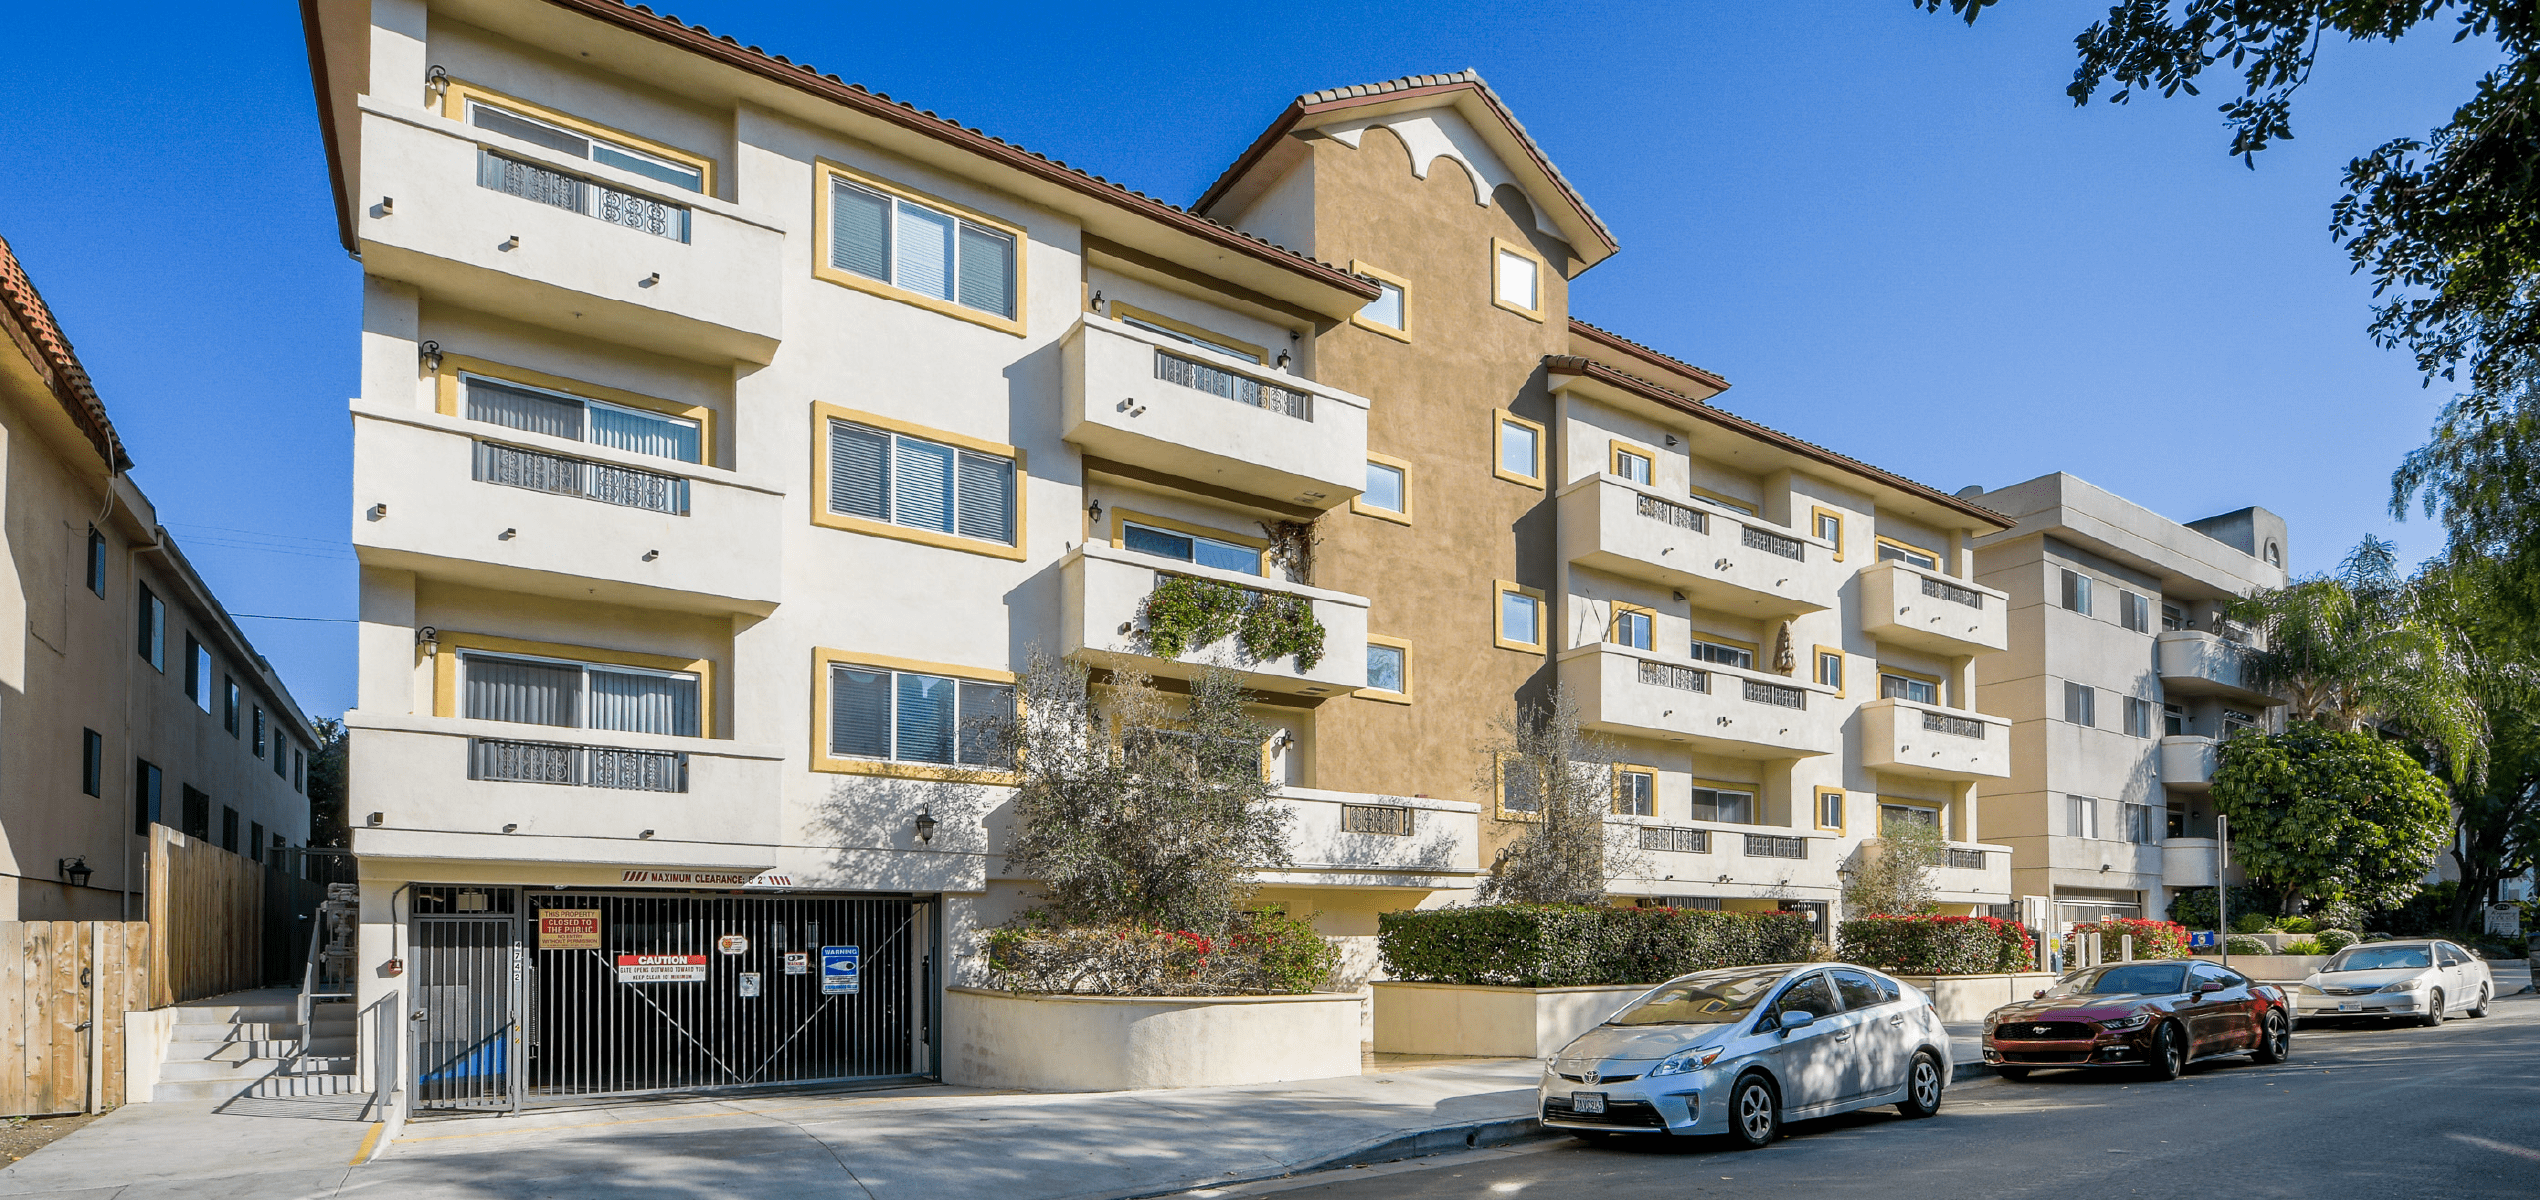 Exterior of 4742 Sepulveda, a 21-unit trophy multifamily property in Sherman Oaks